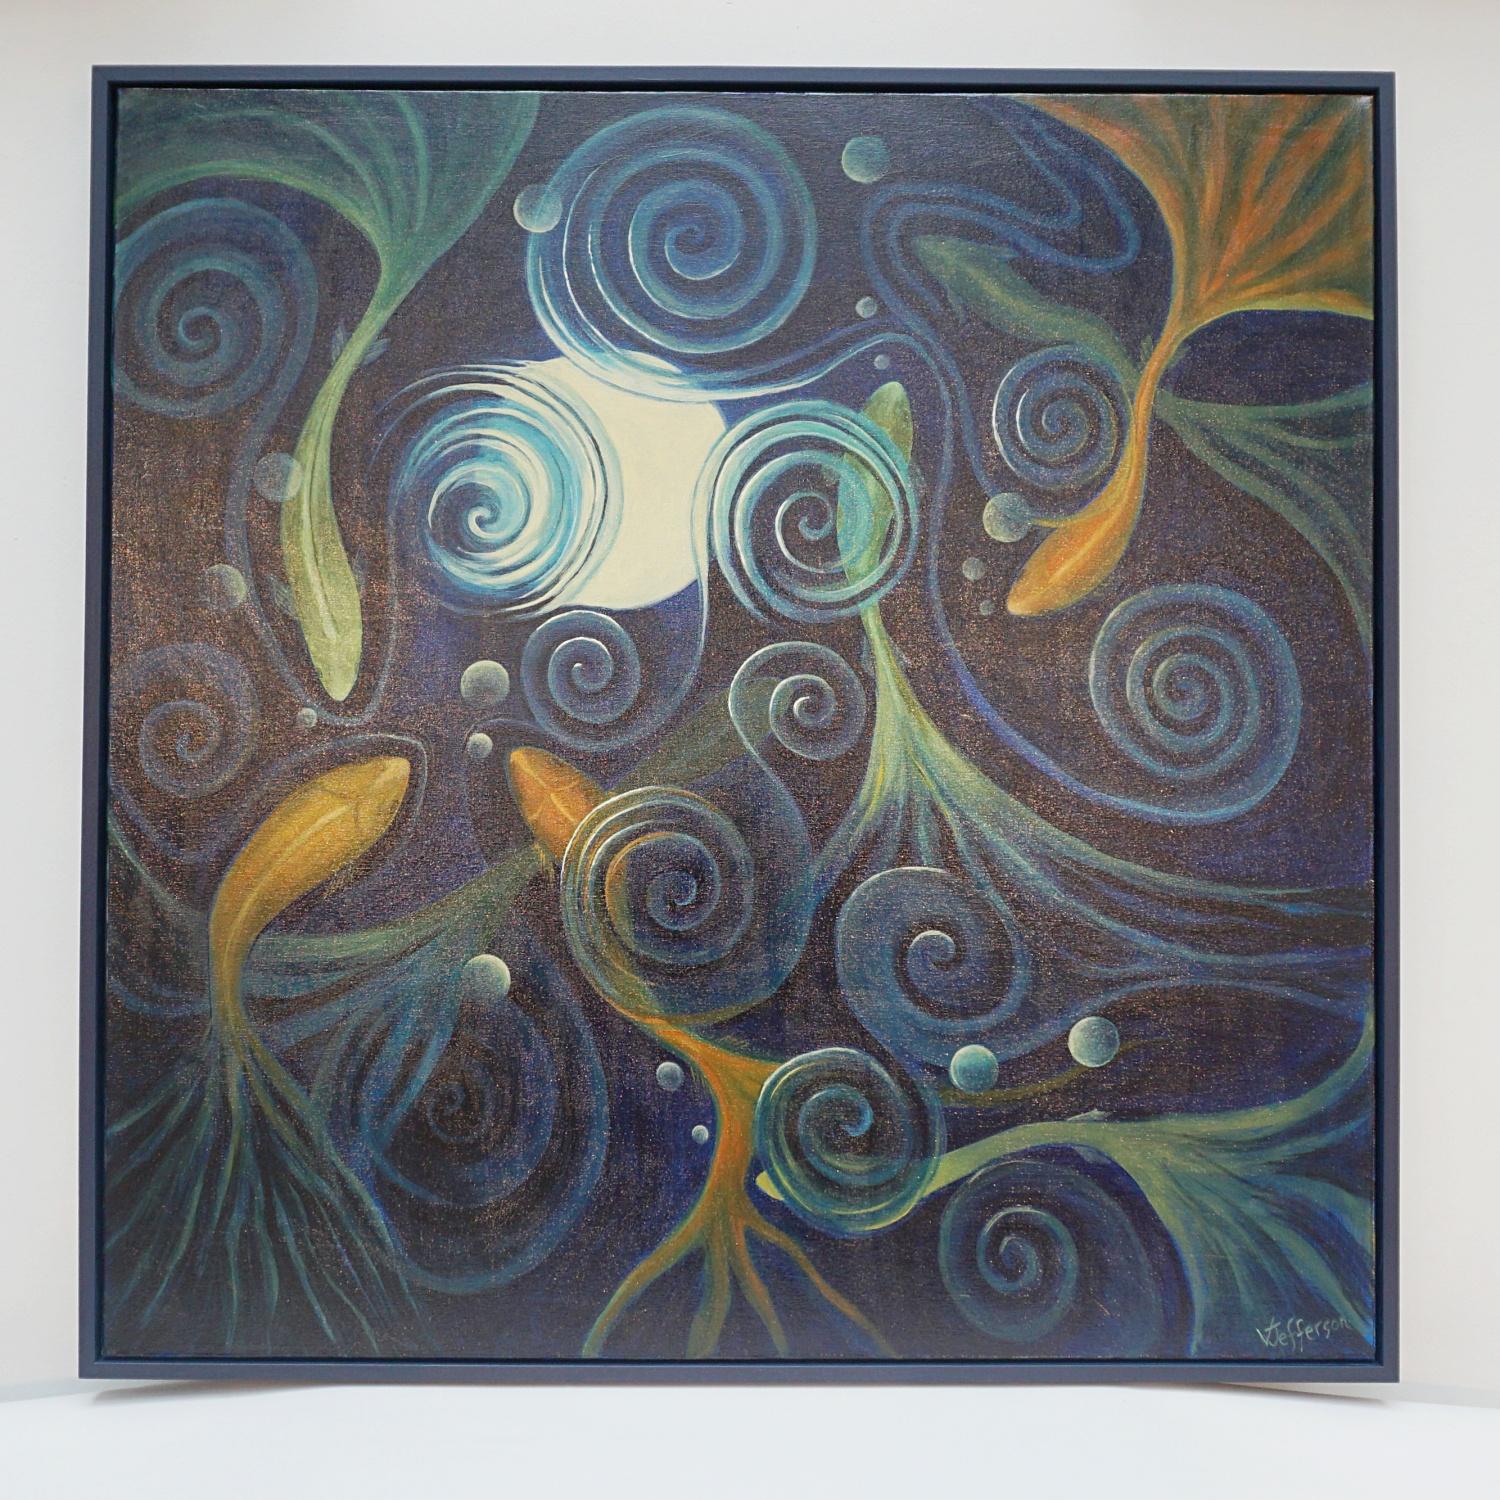 'Moonlit Pond' An Art Deco style contemporary painting by Vera Jefferson. Oil on canvas, depicting various fish dazzling in a deep blue pond. Painted amongst a stylised, abstract background. Signed V Jefferson to lower right. 

Vera Jefferson